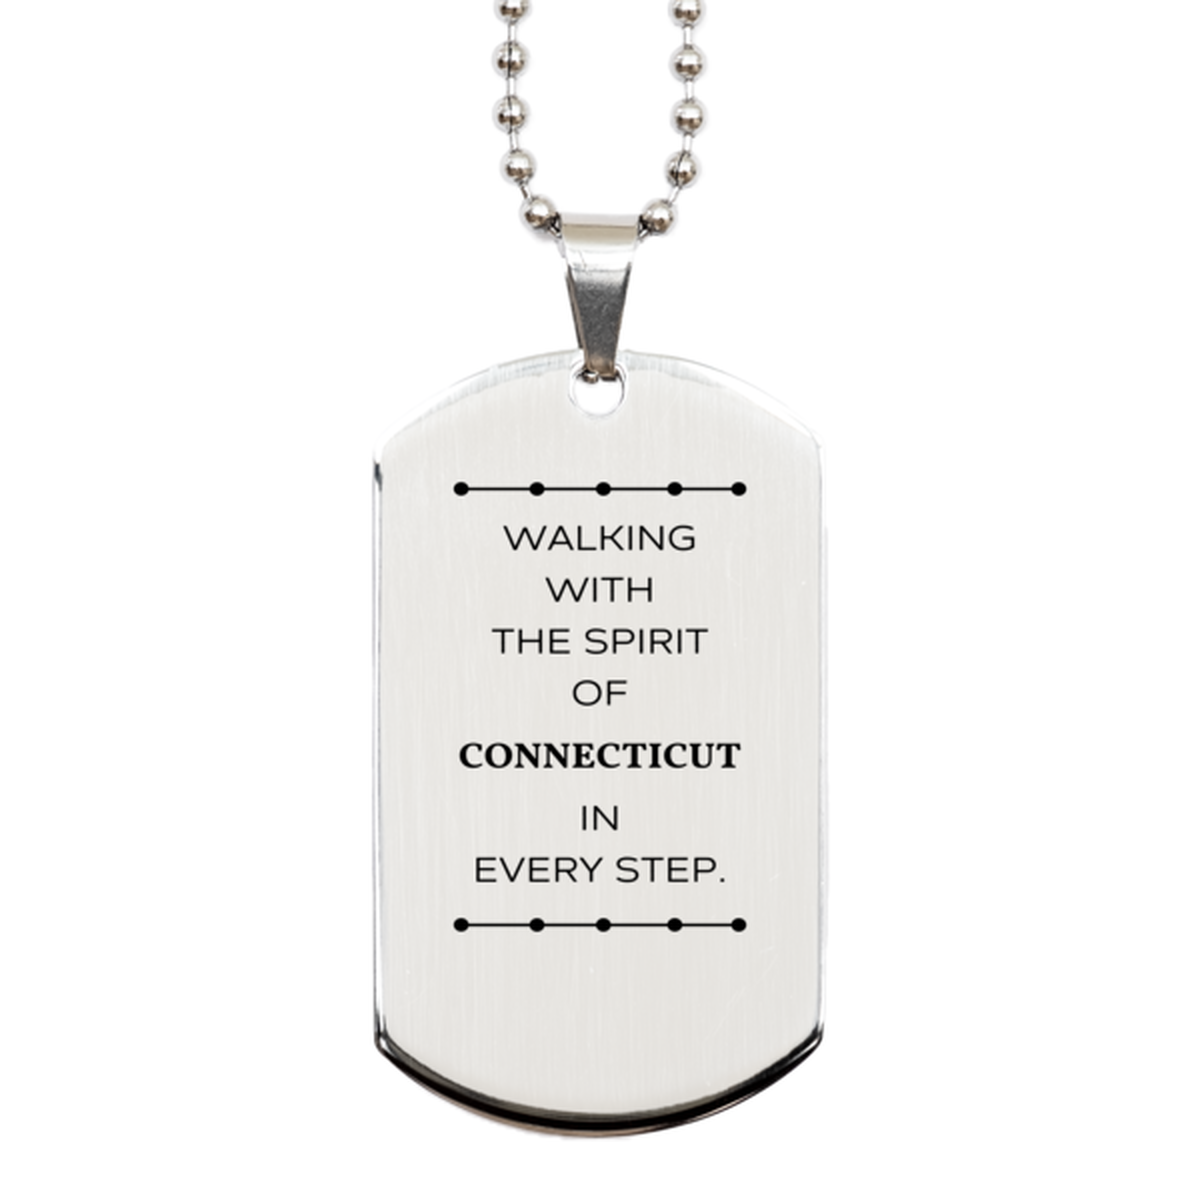 Connecticut Gifts, Walking with the spirit, Love Connecticut Birthday Christmas Silver Dog Tag For Connecticut People, Men, Women, Friends